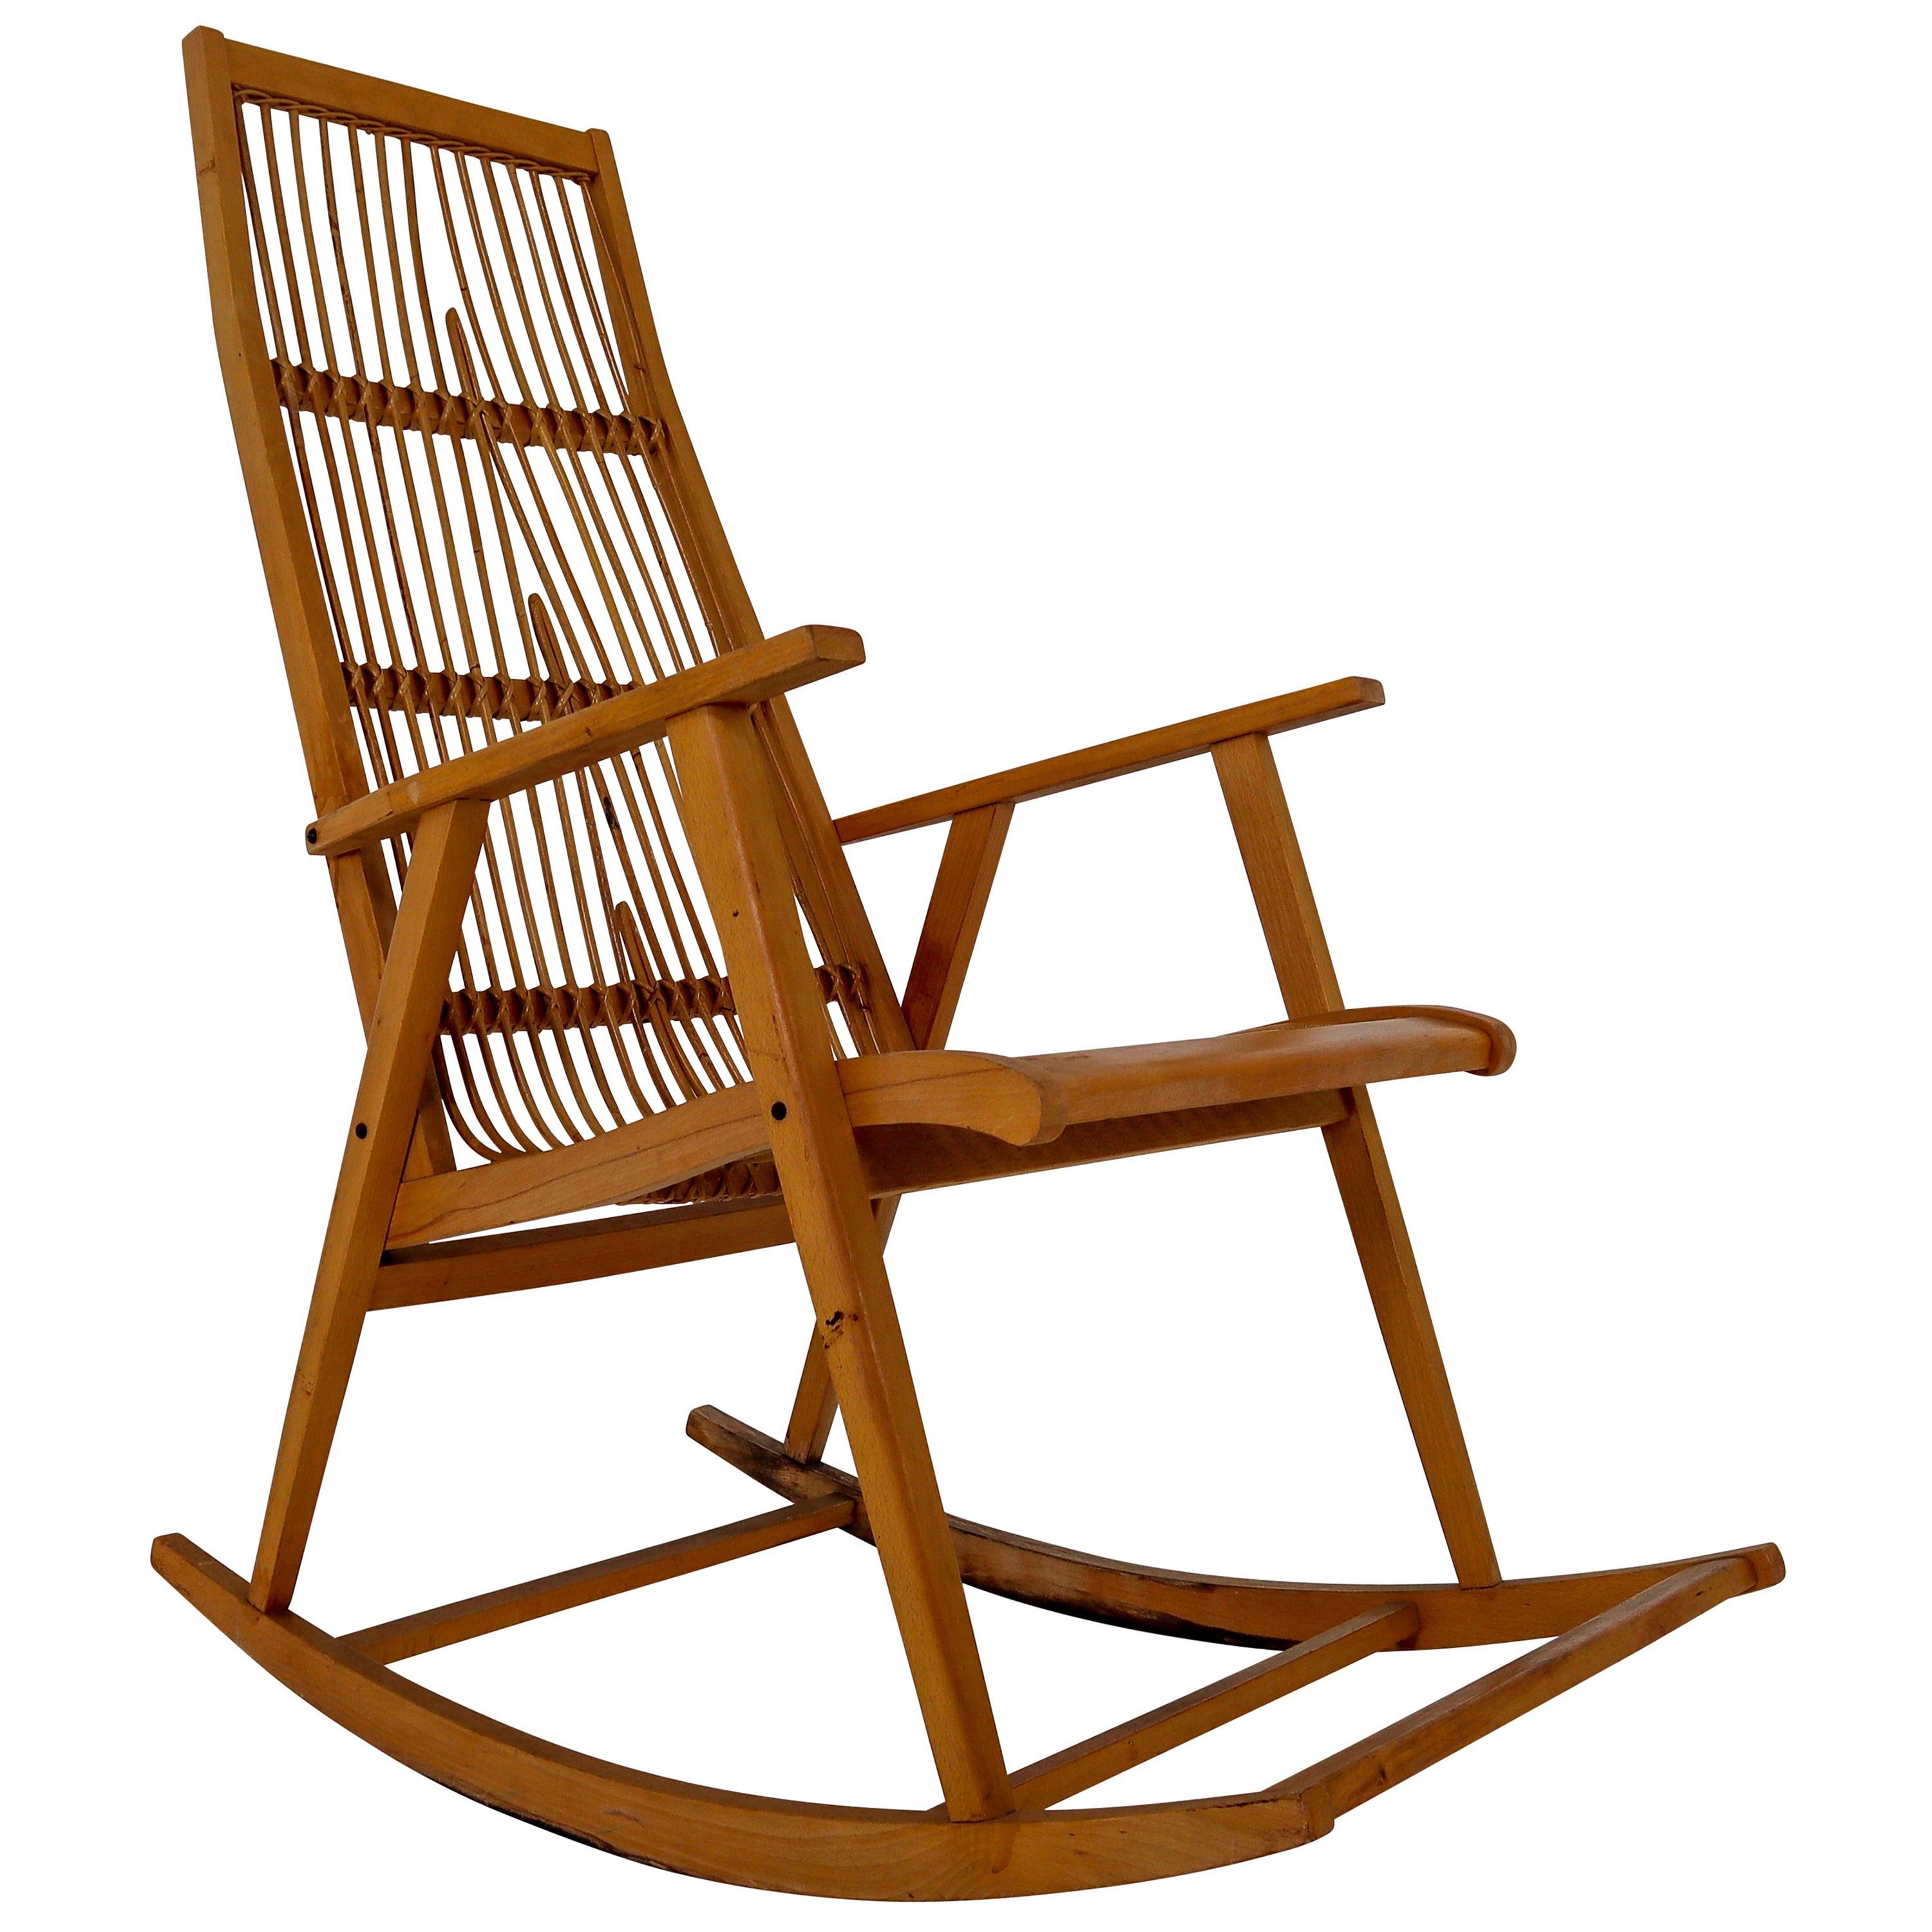 Midcentury Vintage Rocking Chair in Beechwood and Straw, Germany, 1960s